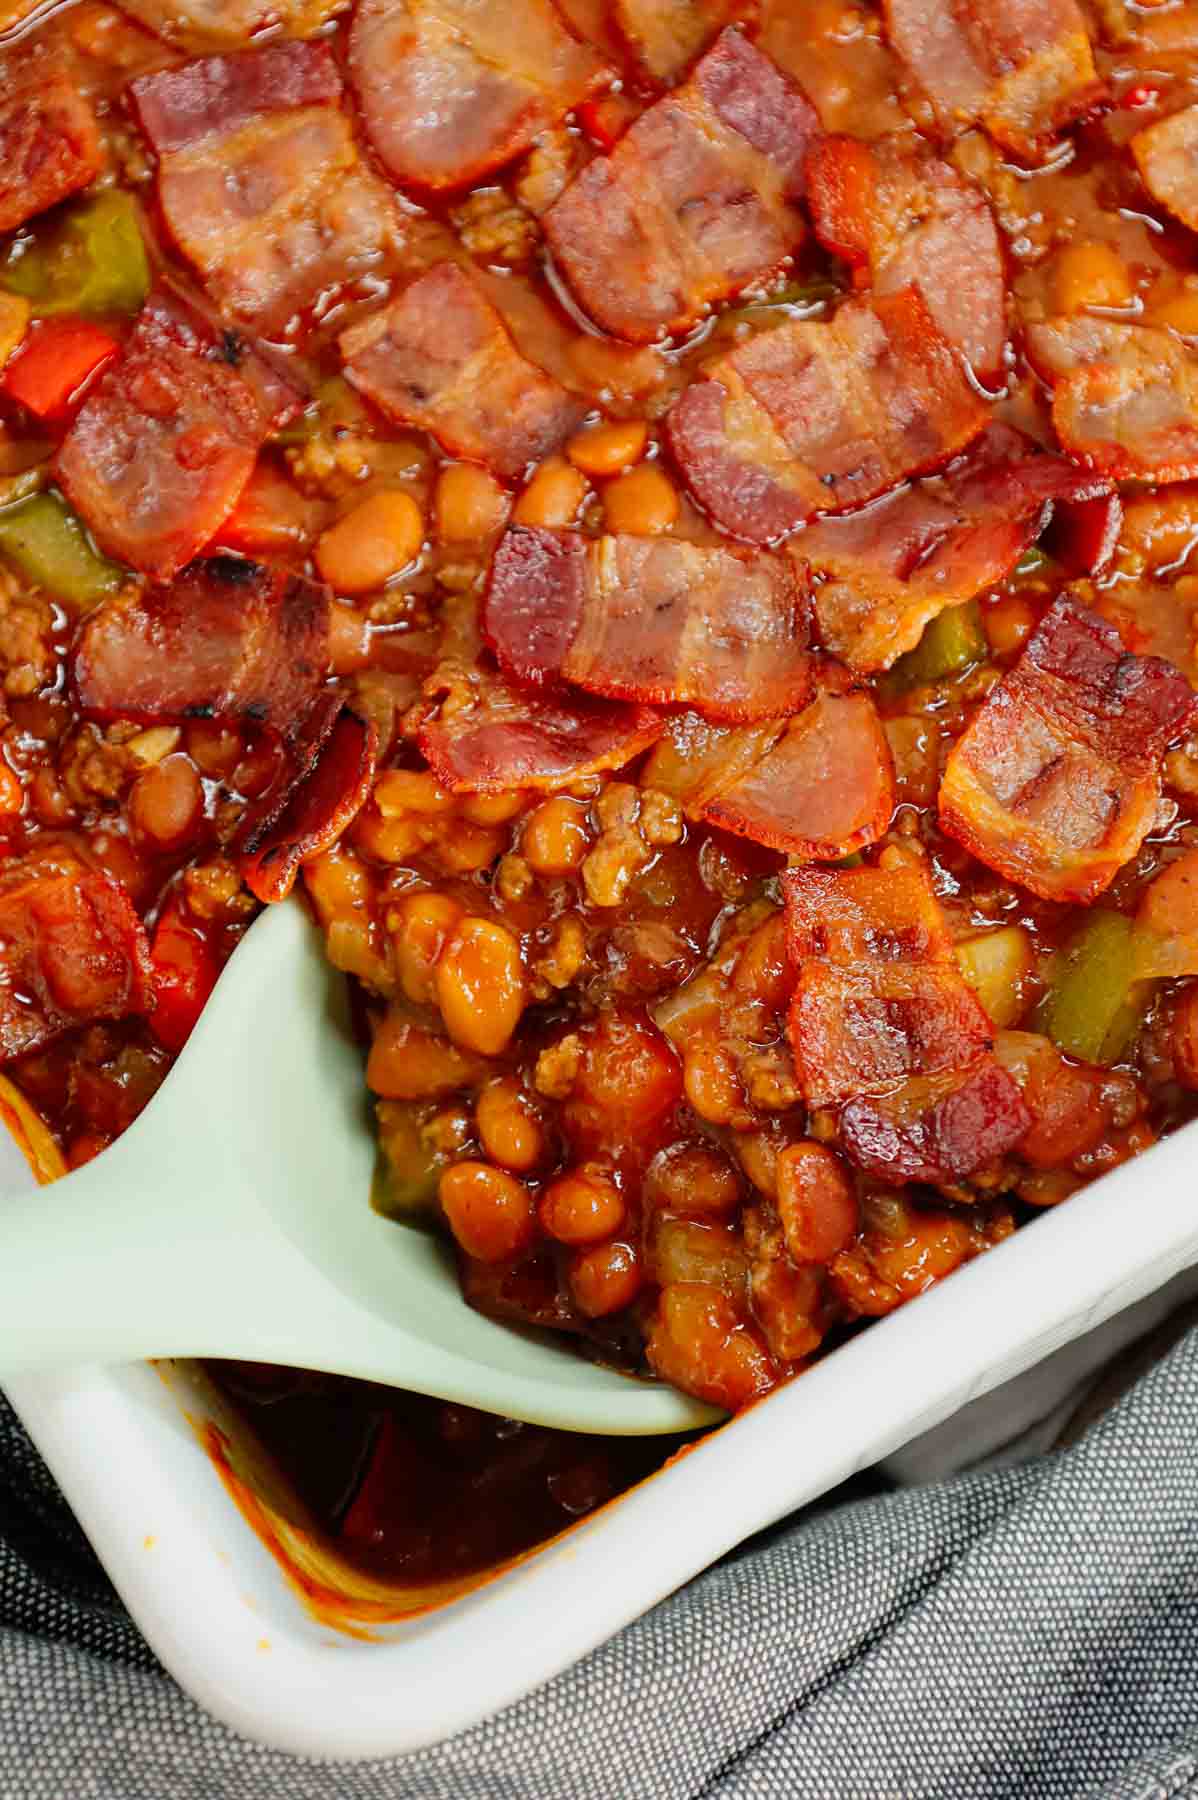 Baked Beans with Ground Beef is a hearty dinner recipe loaded with red and green bell peppers, onions, bacon and Bush's Original baked beans all baked together in a sweet and savoury barbecue sauce.